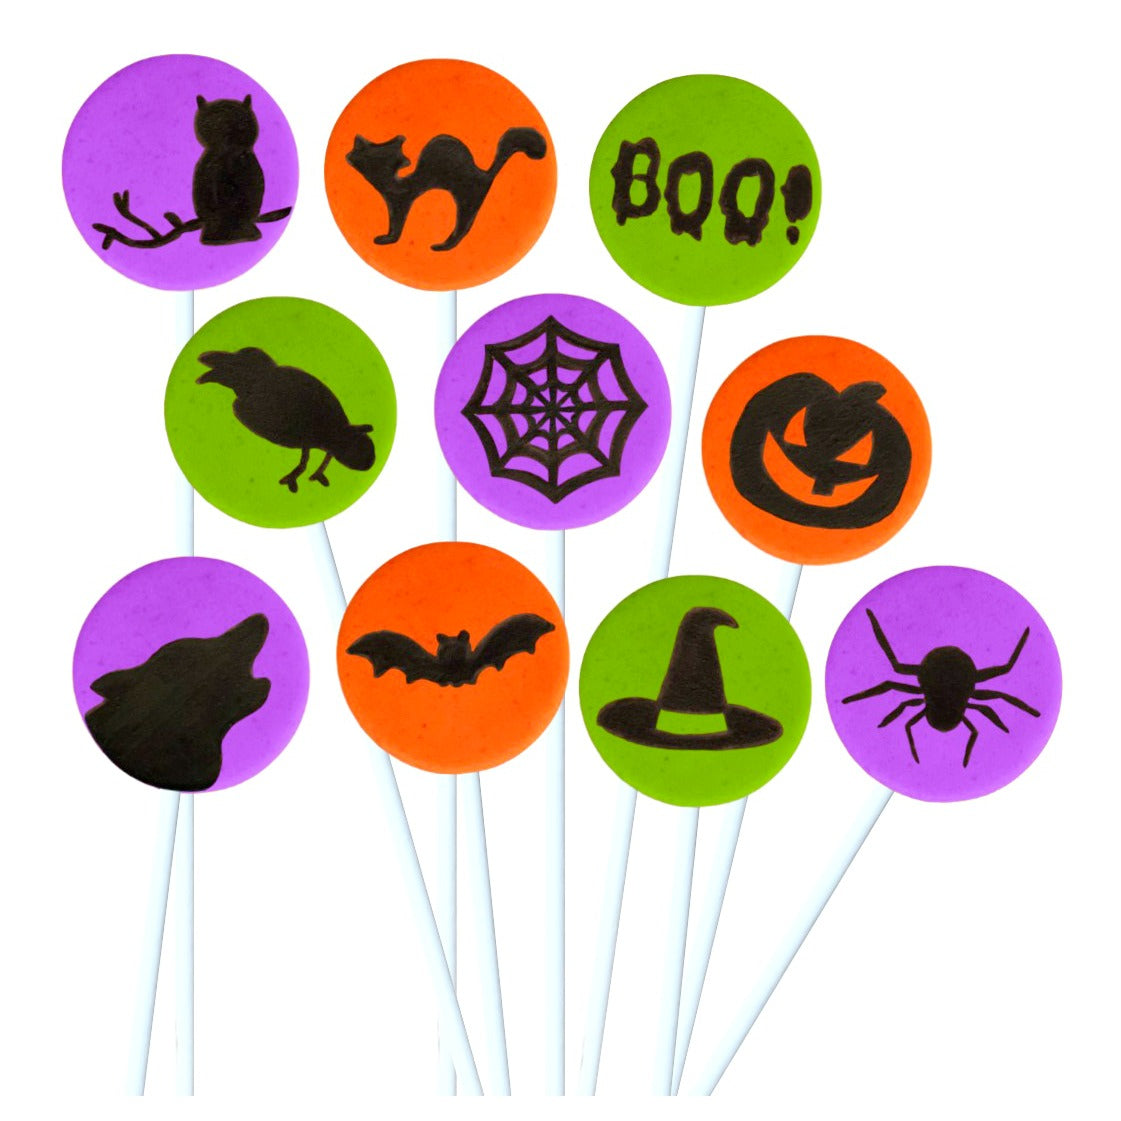 colorful creepy Halloween silhouettes marzipan candy lollipops